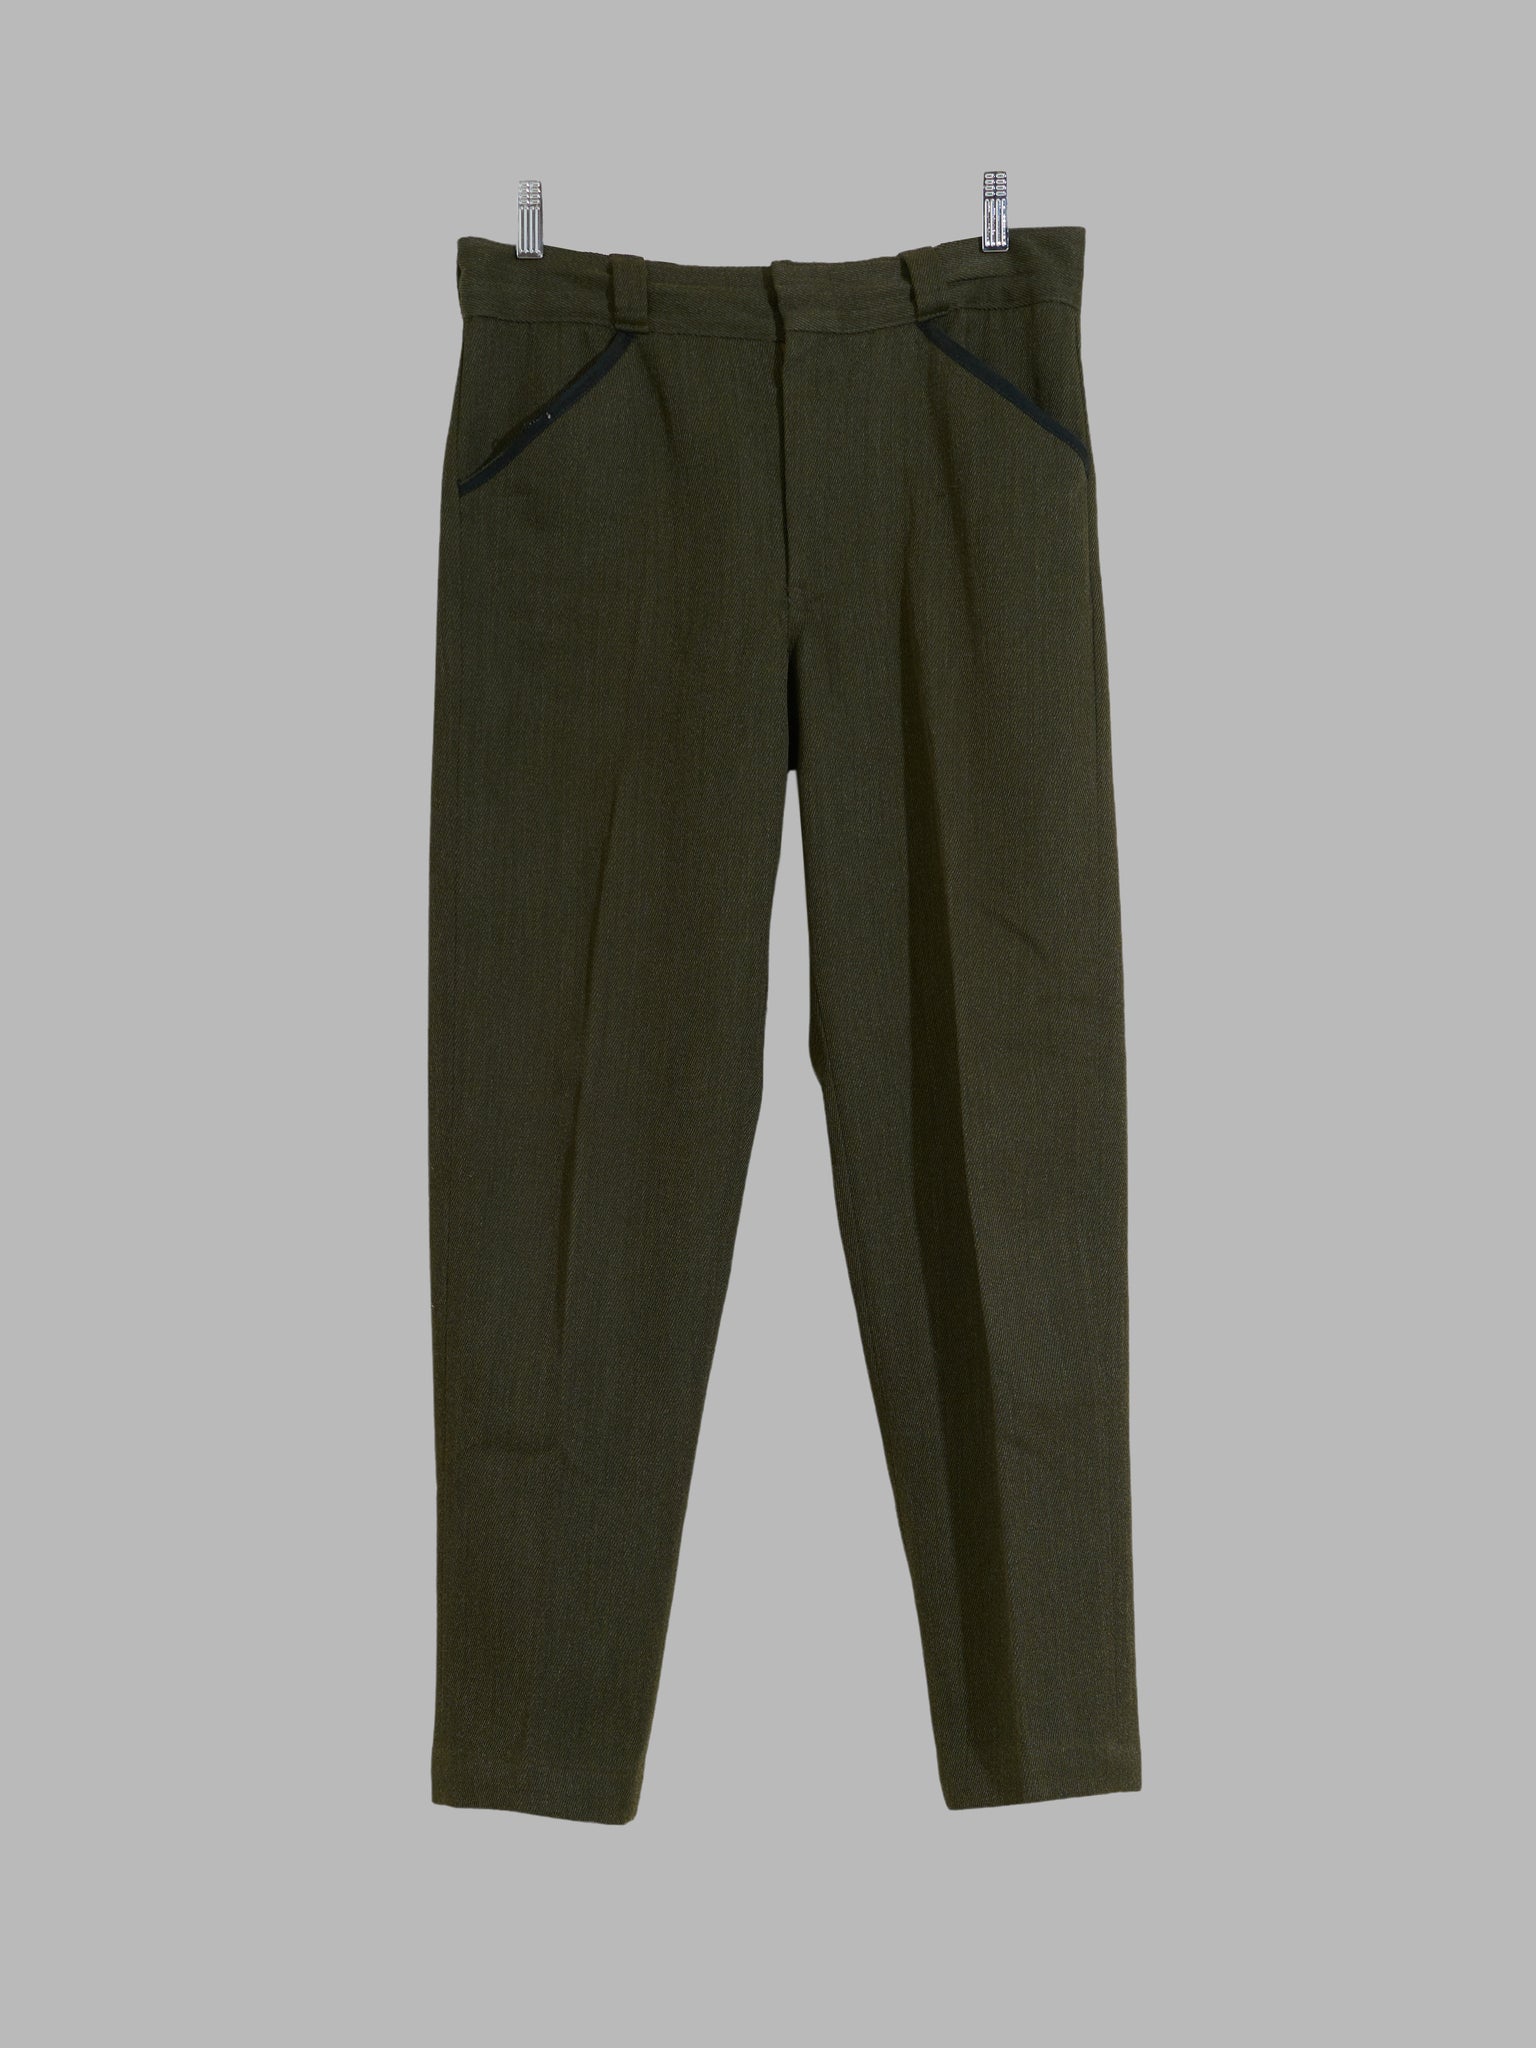 Woolrich green wool polyester twill contrast trim trousers